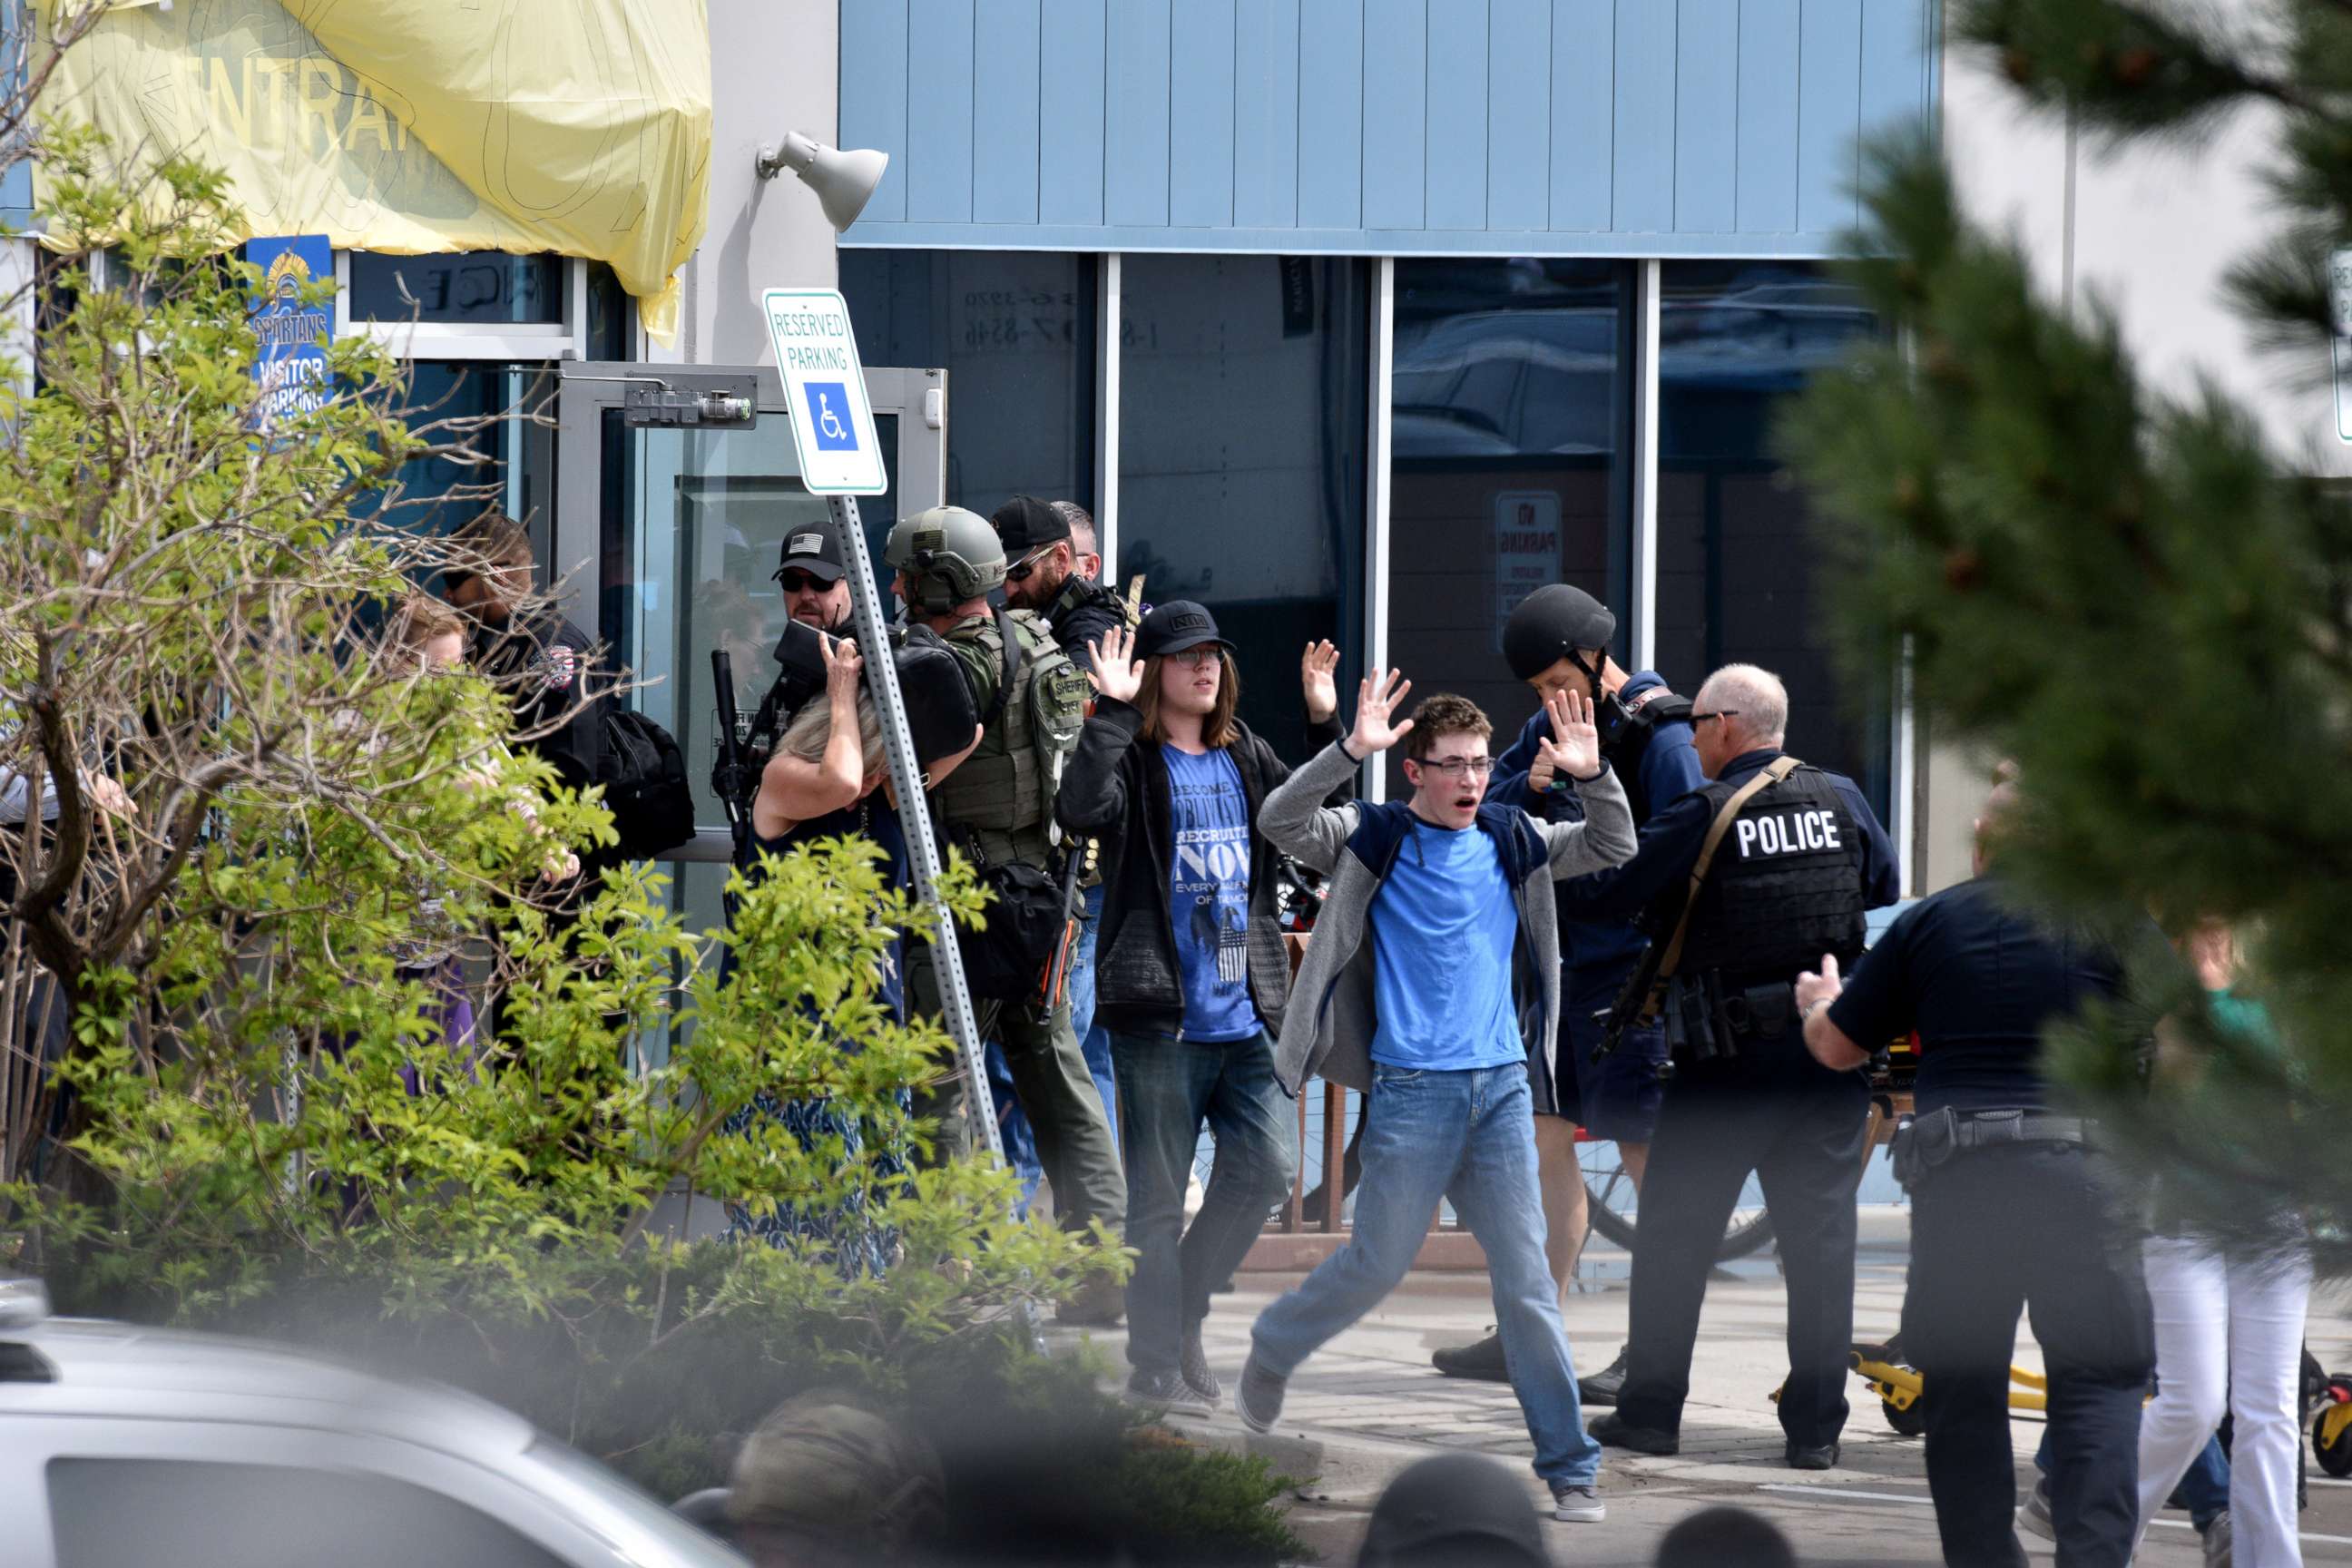 PHOTO: Students and teachers raise their arms as the exit the scene of a shooting in which at least seven students were injured at the STEM School Highlands Ranch, May 7, 2019, in Highlands Ranch, Colo.